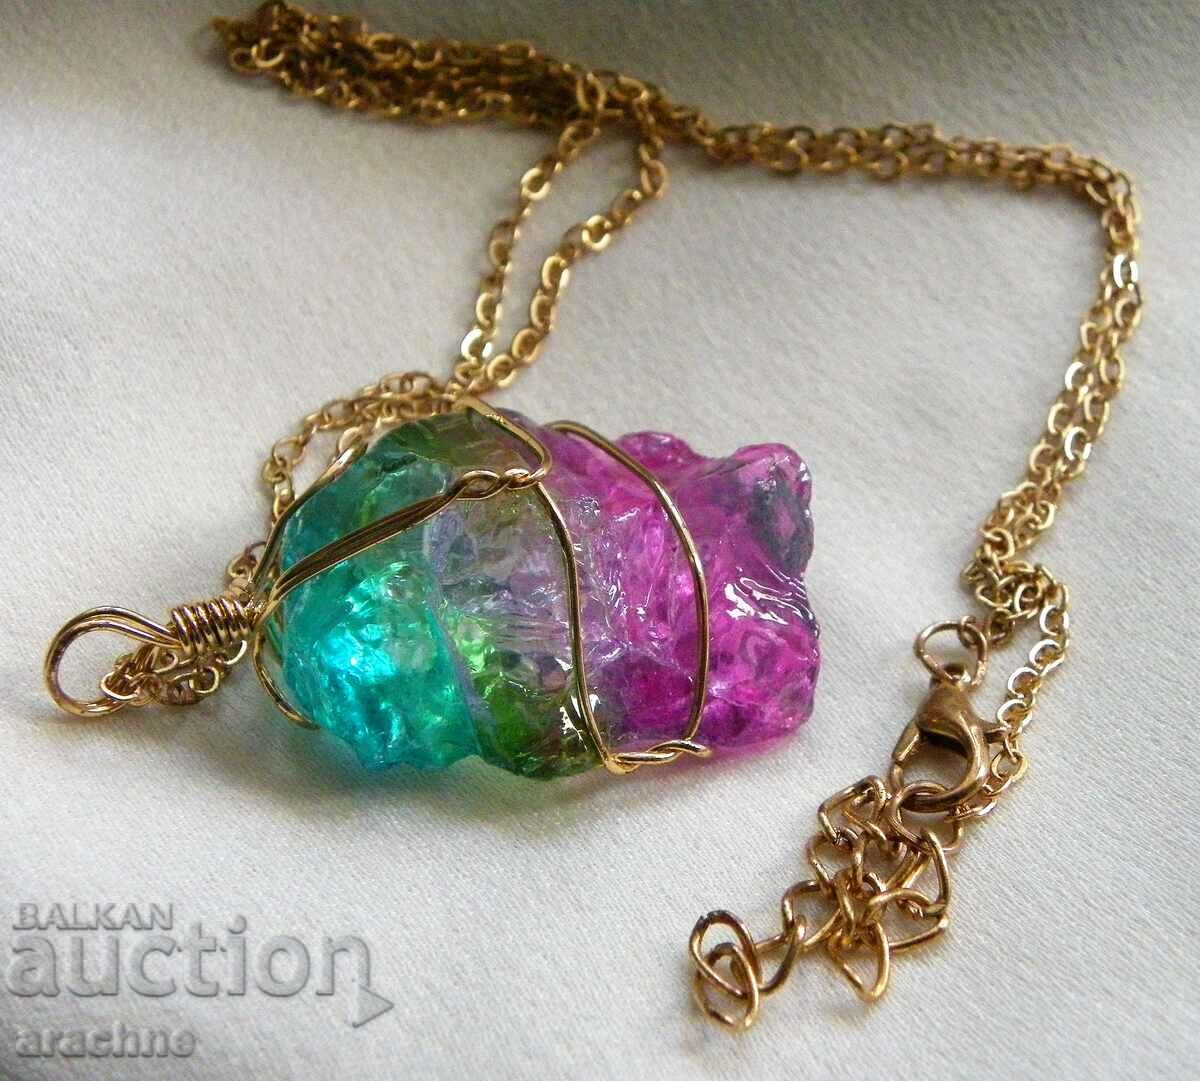 Gold-plated silver necklace with a large Brazilian "watermelon" tourmaline